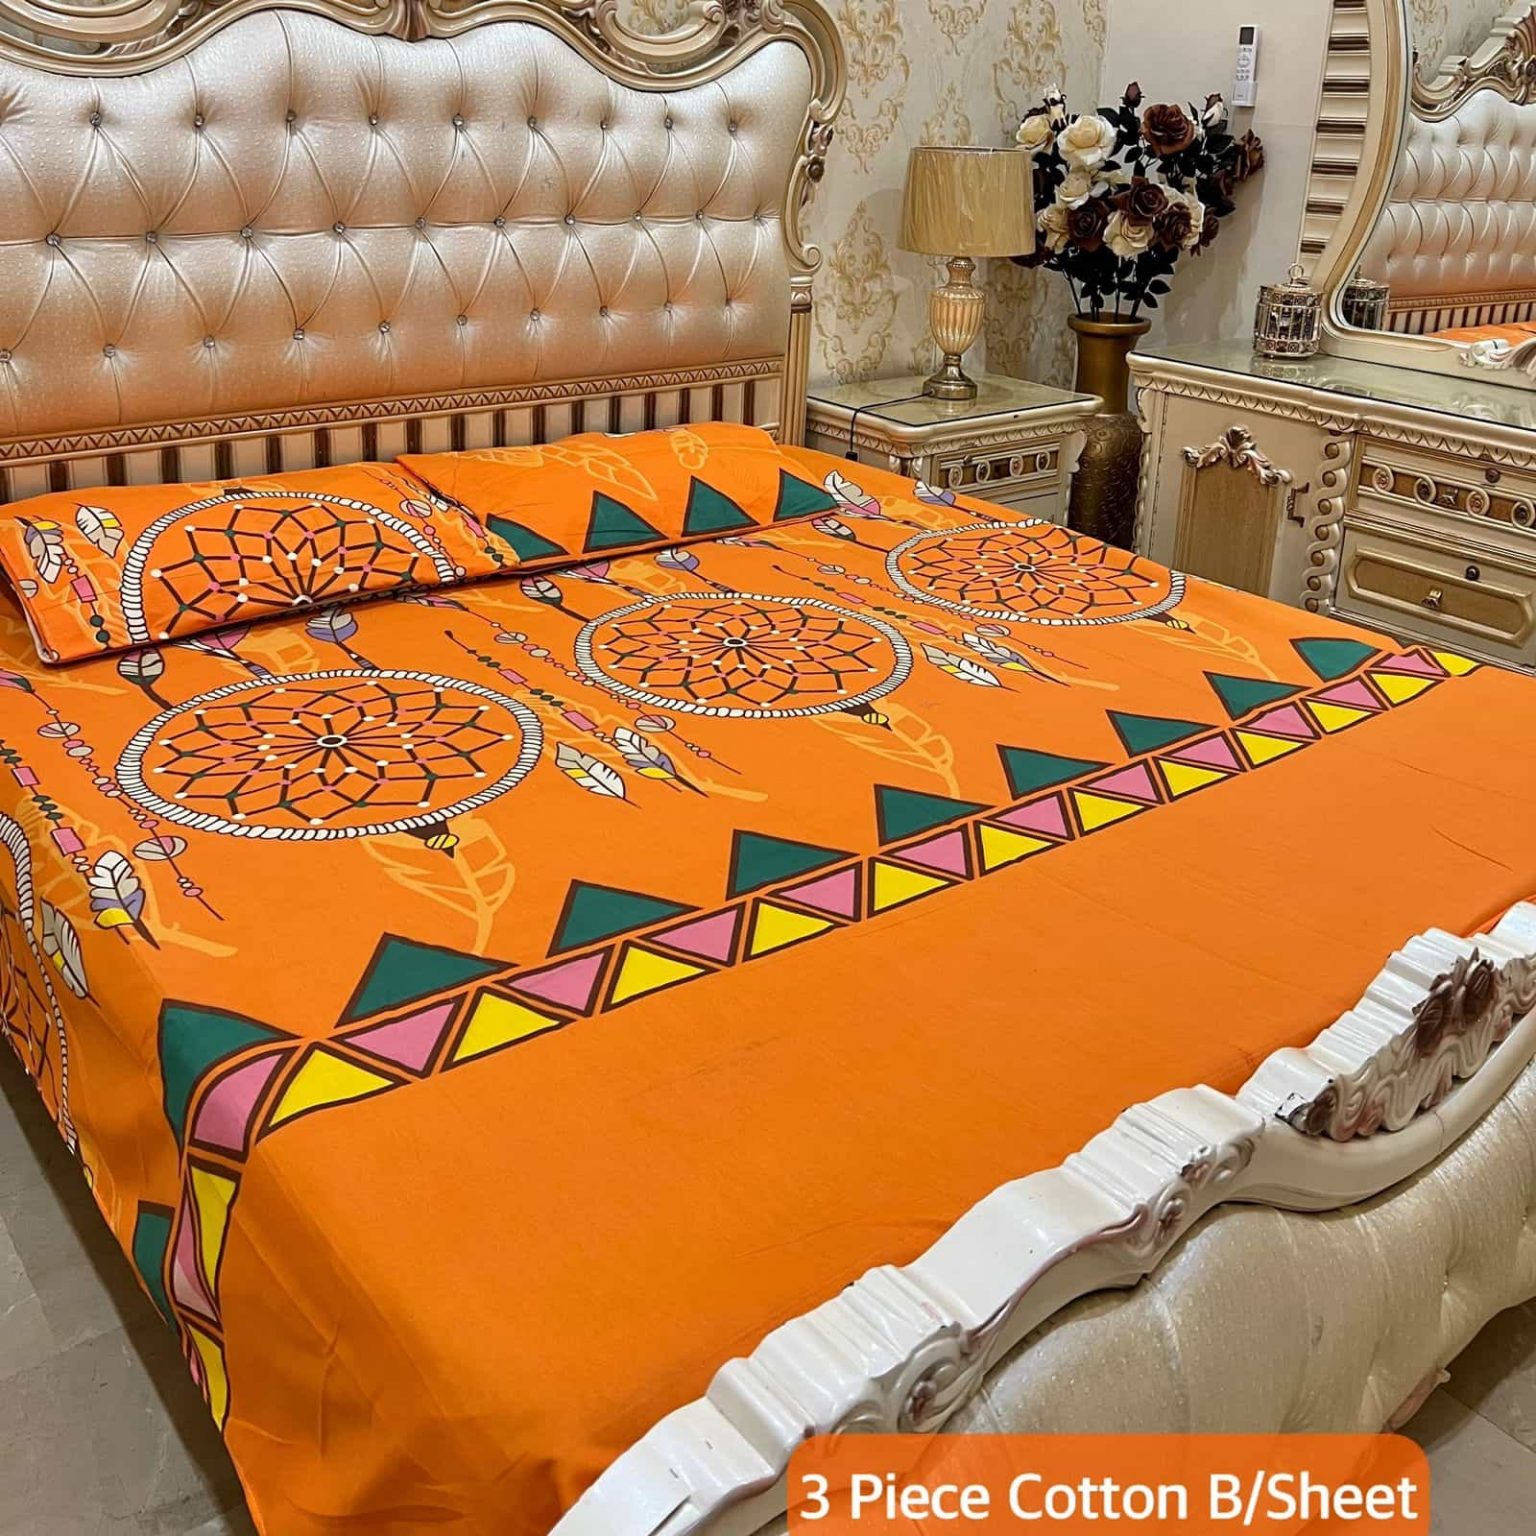 Latest bedsheets designs